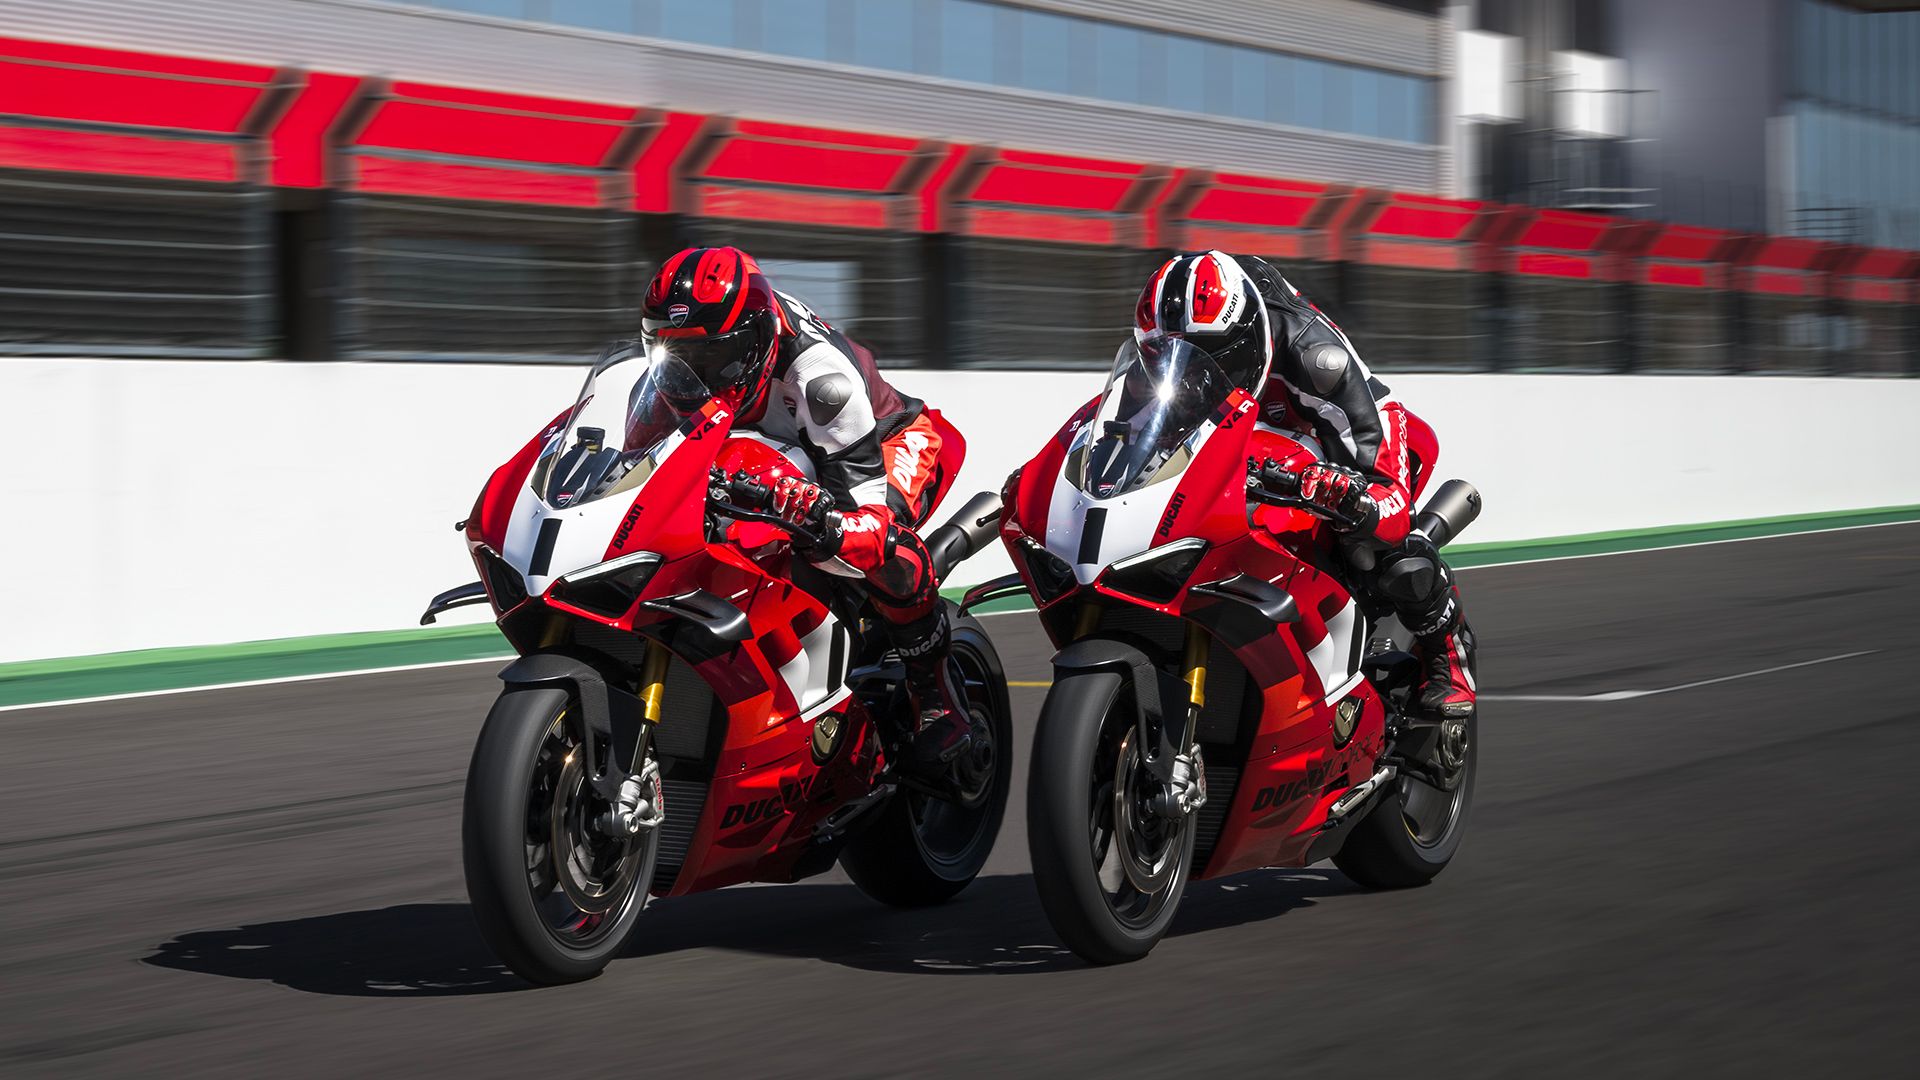 Two Ducati Panigale V4 R side by side on a test track